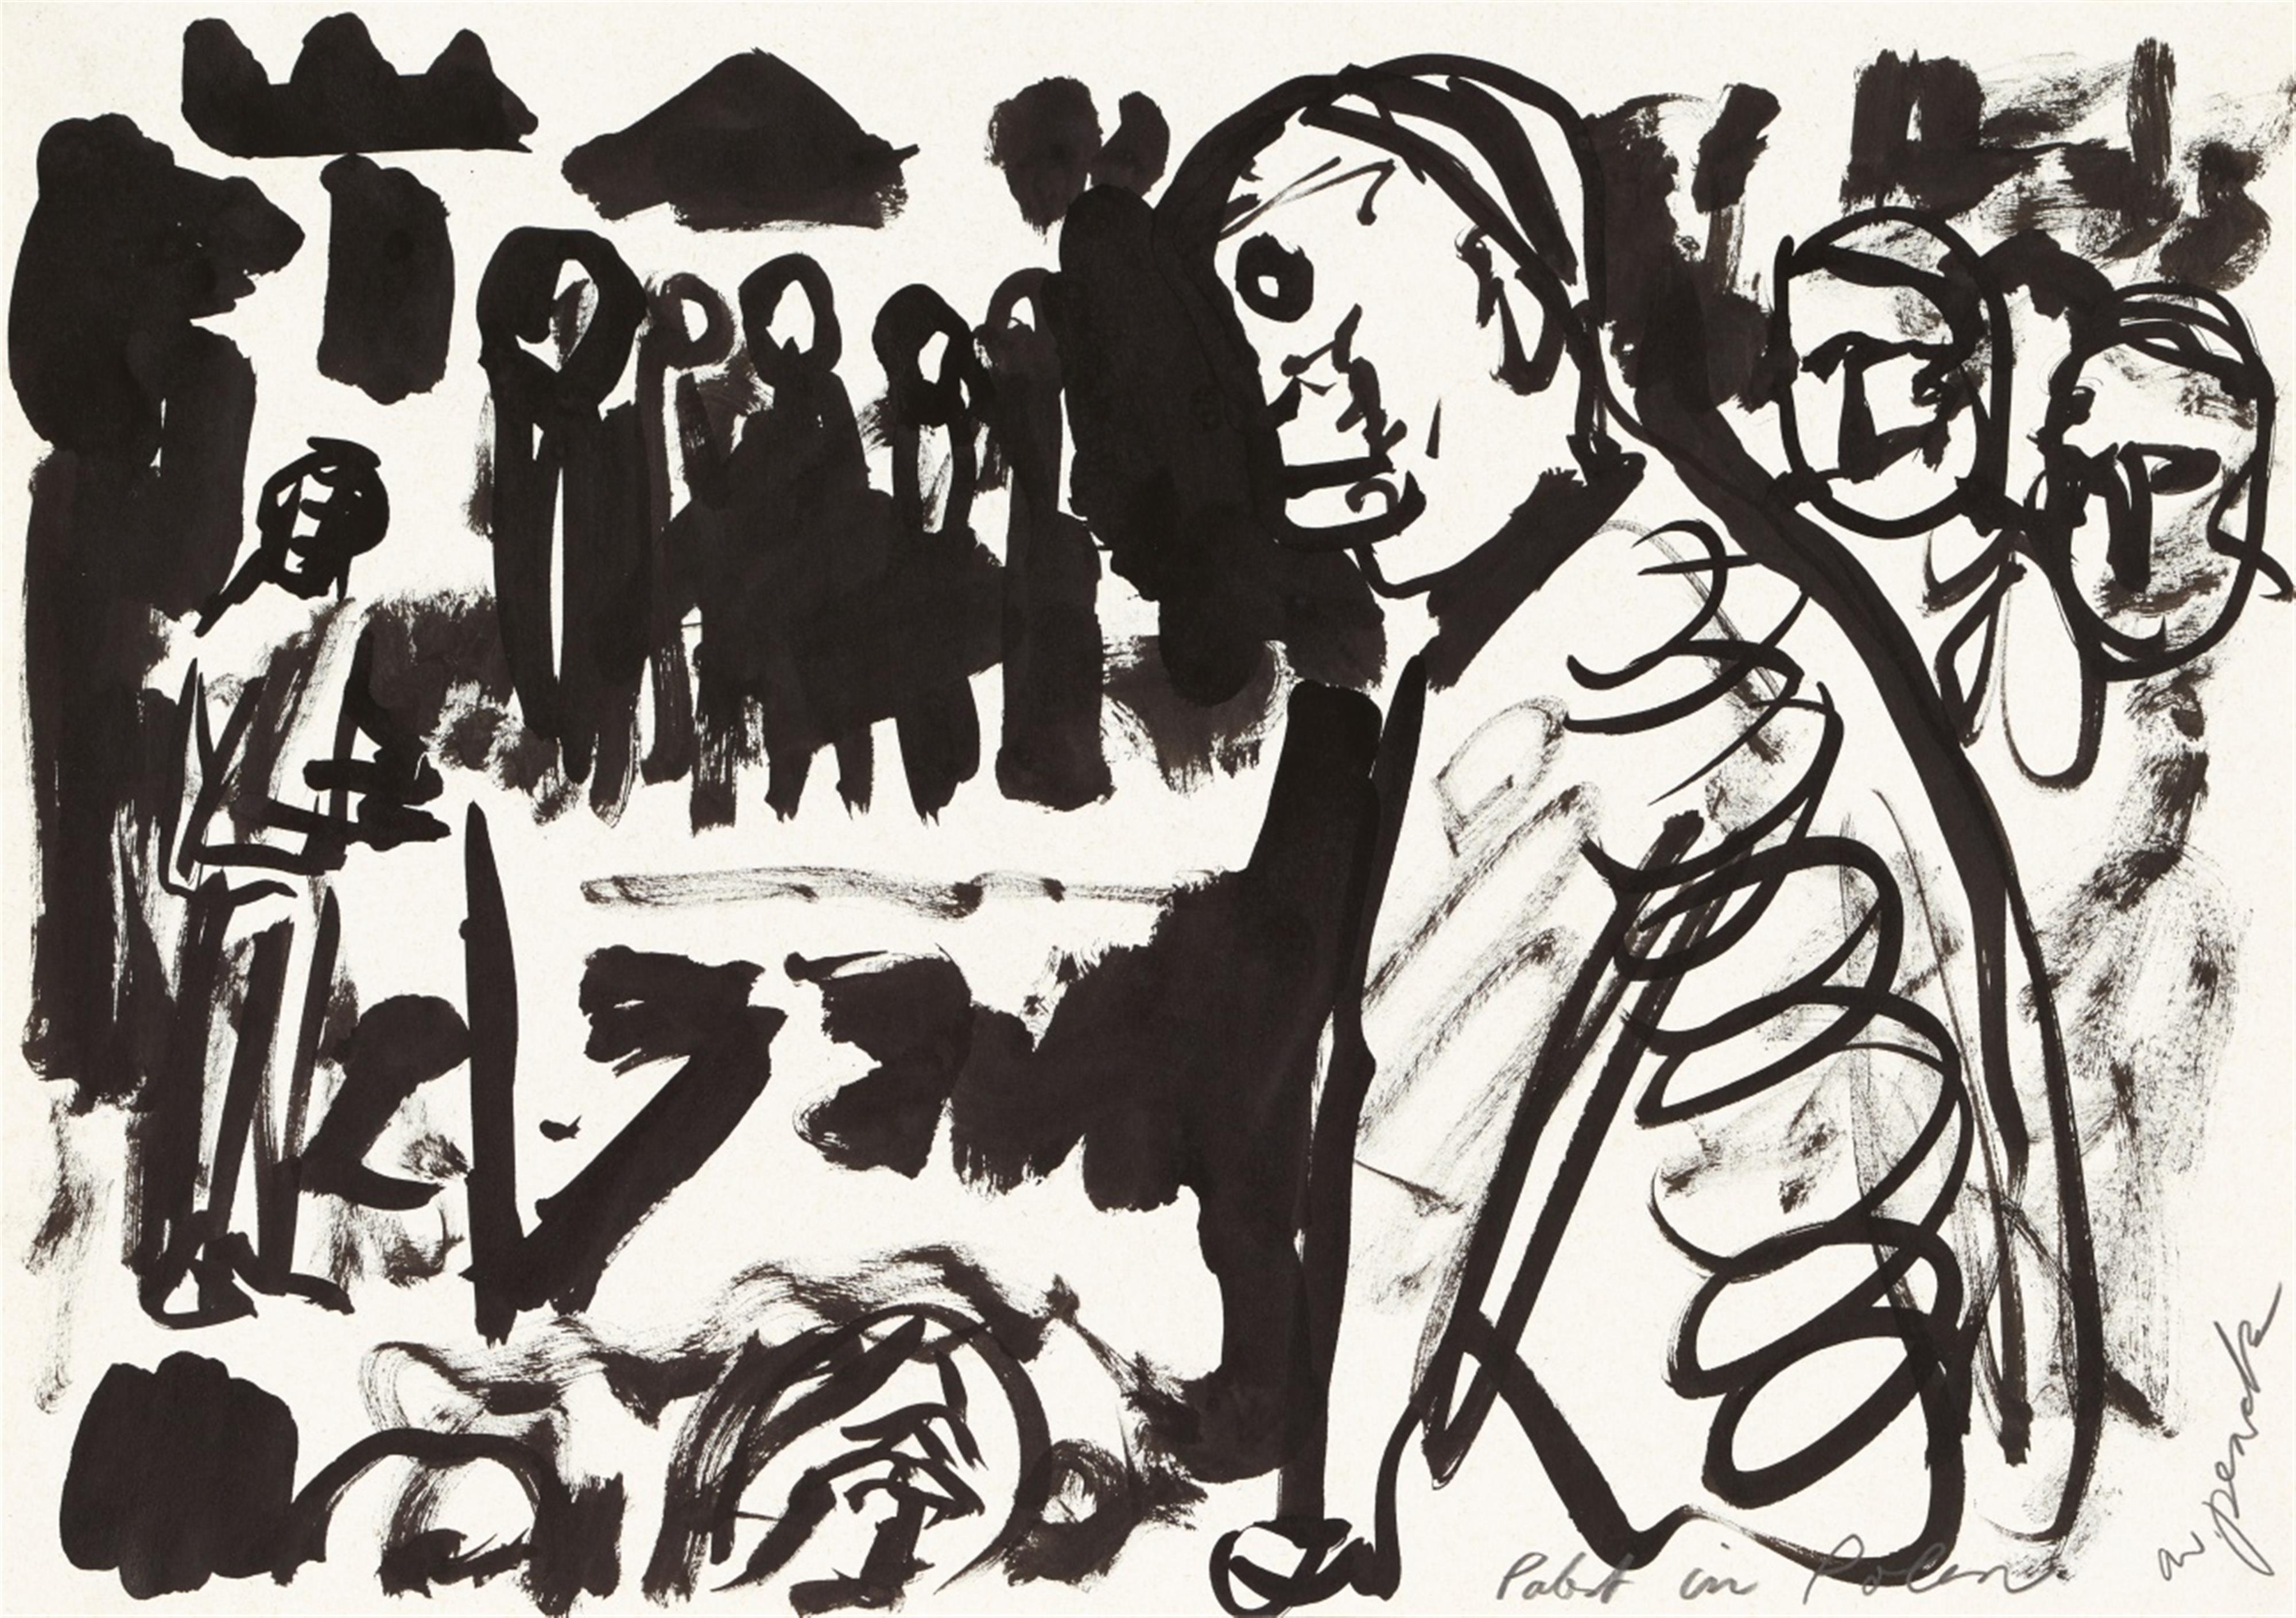 A.R. Penck - Pabst in Polen - image-7